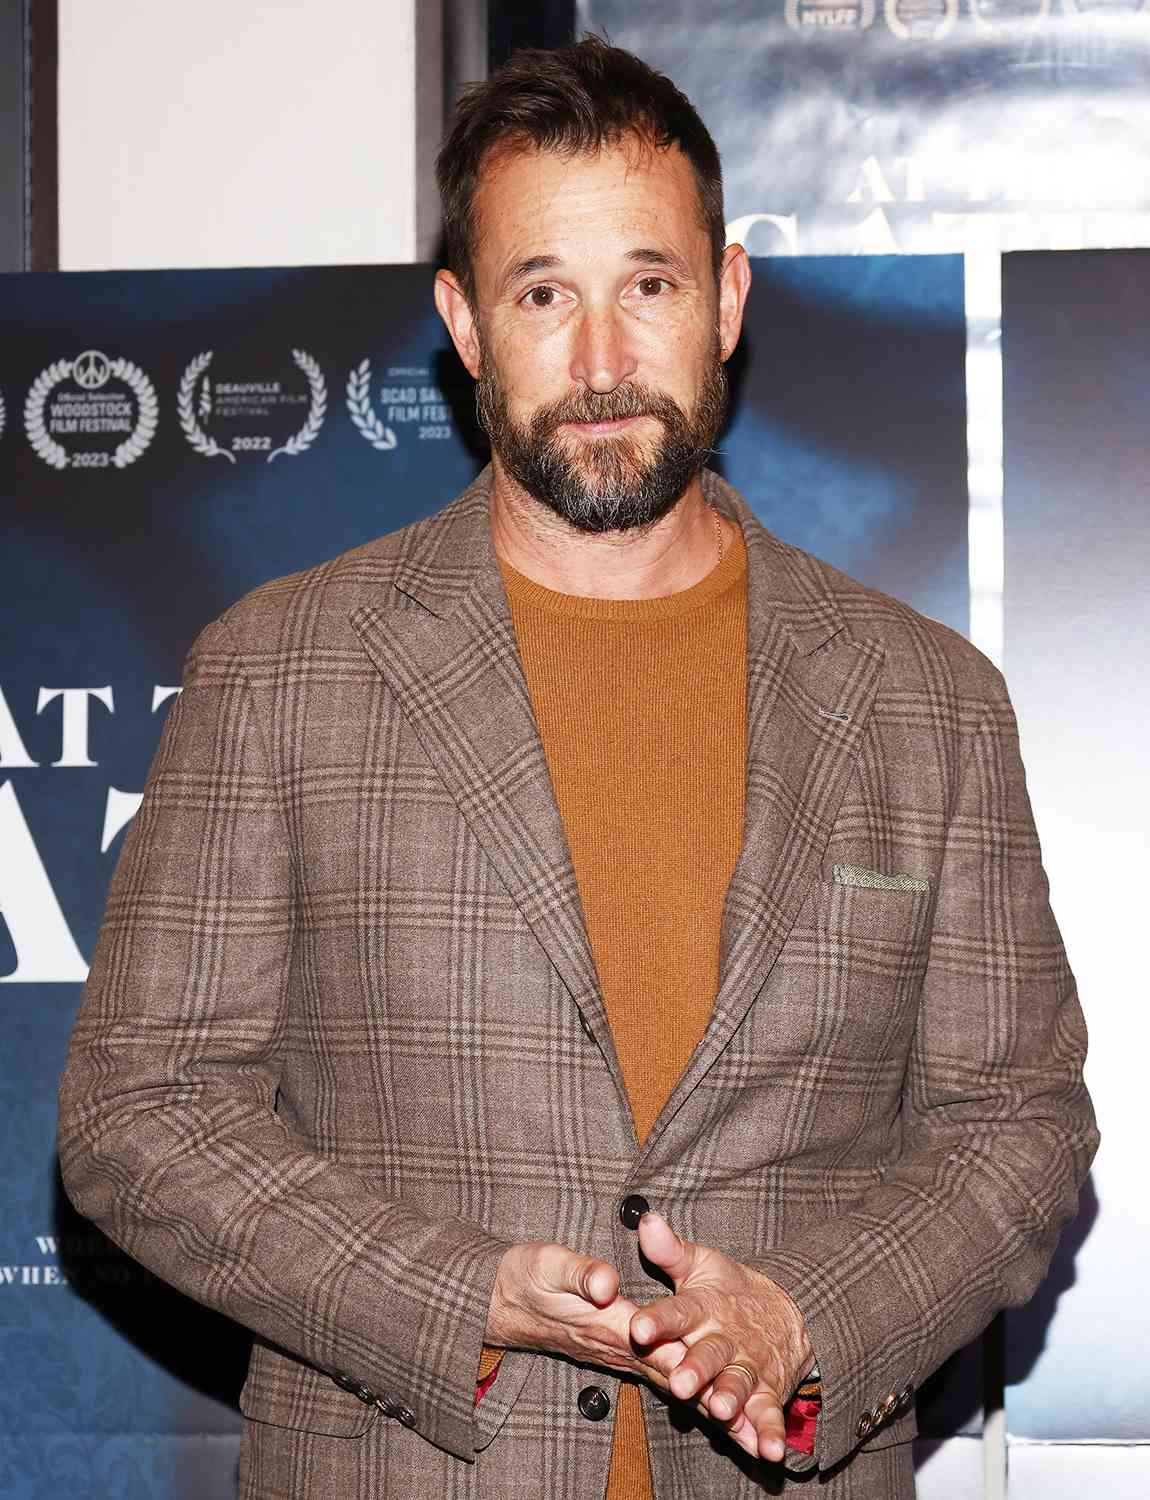 Noah Wyle attends the "At The Gates" LA Special Screening - Picturehouse Will Open The Film On 11/3 In LA And On 11/10 In NY at AMC The Grove 14 on November 02, 2023 in Los Angeles, California.